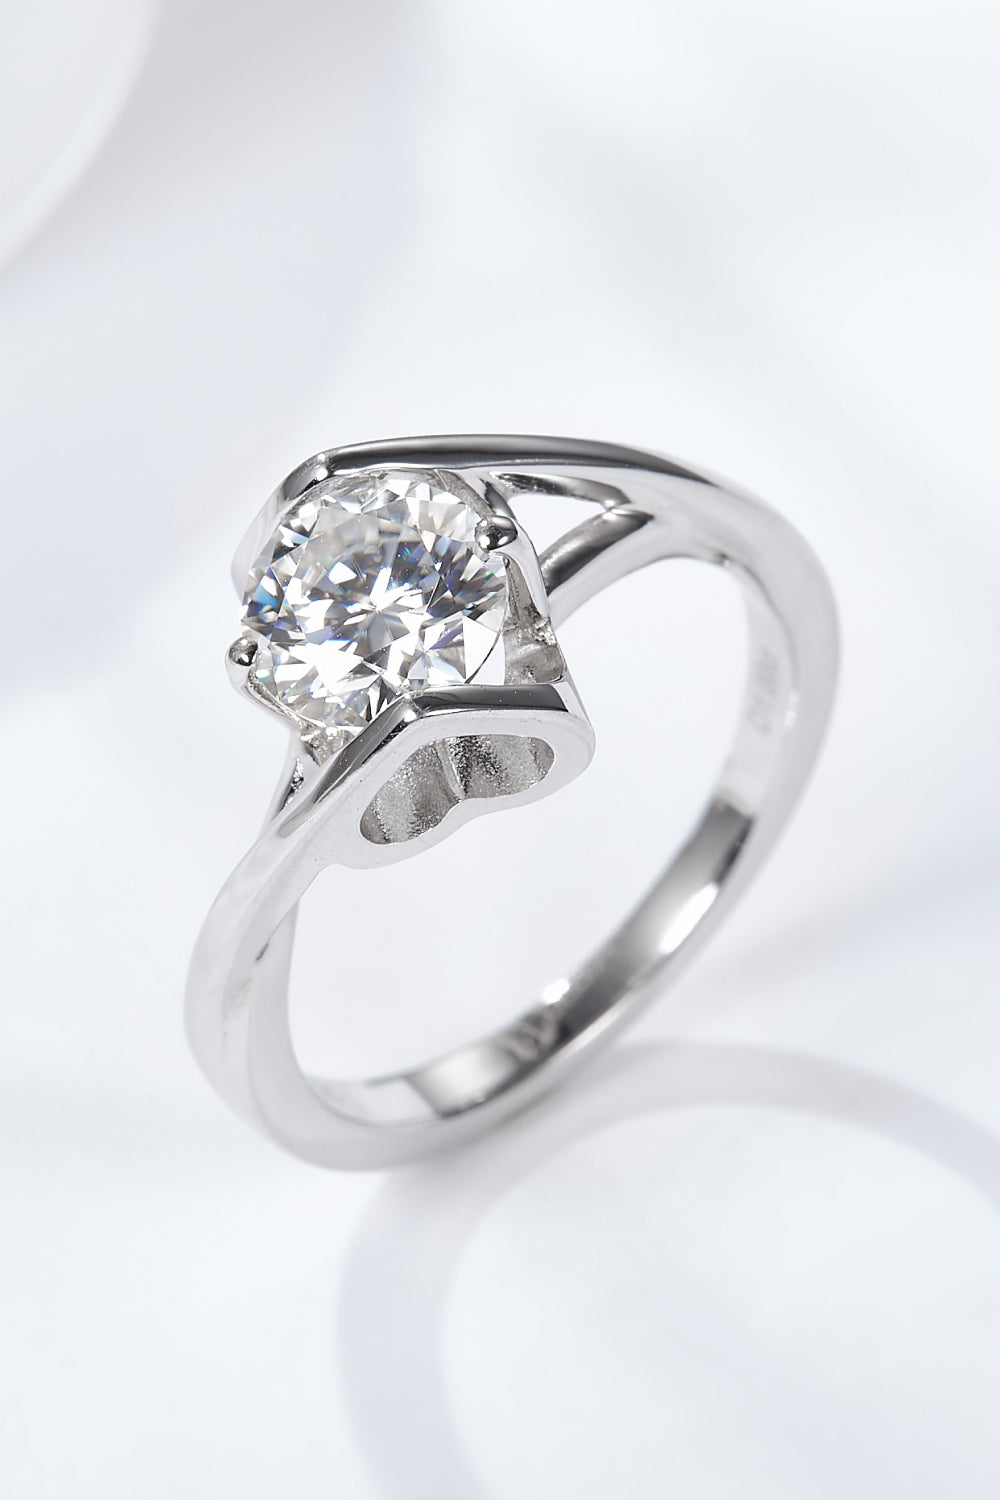 Get What You Need 1 Carat Moissanite Ring - DromedarShop.com Online Boutique